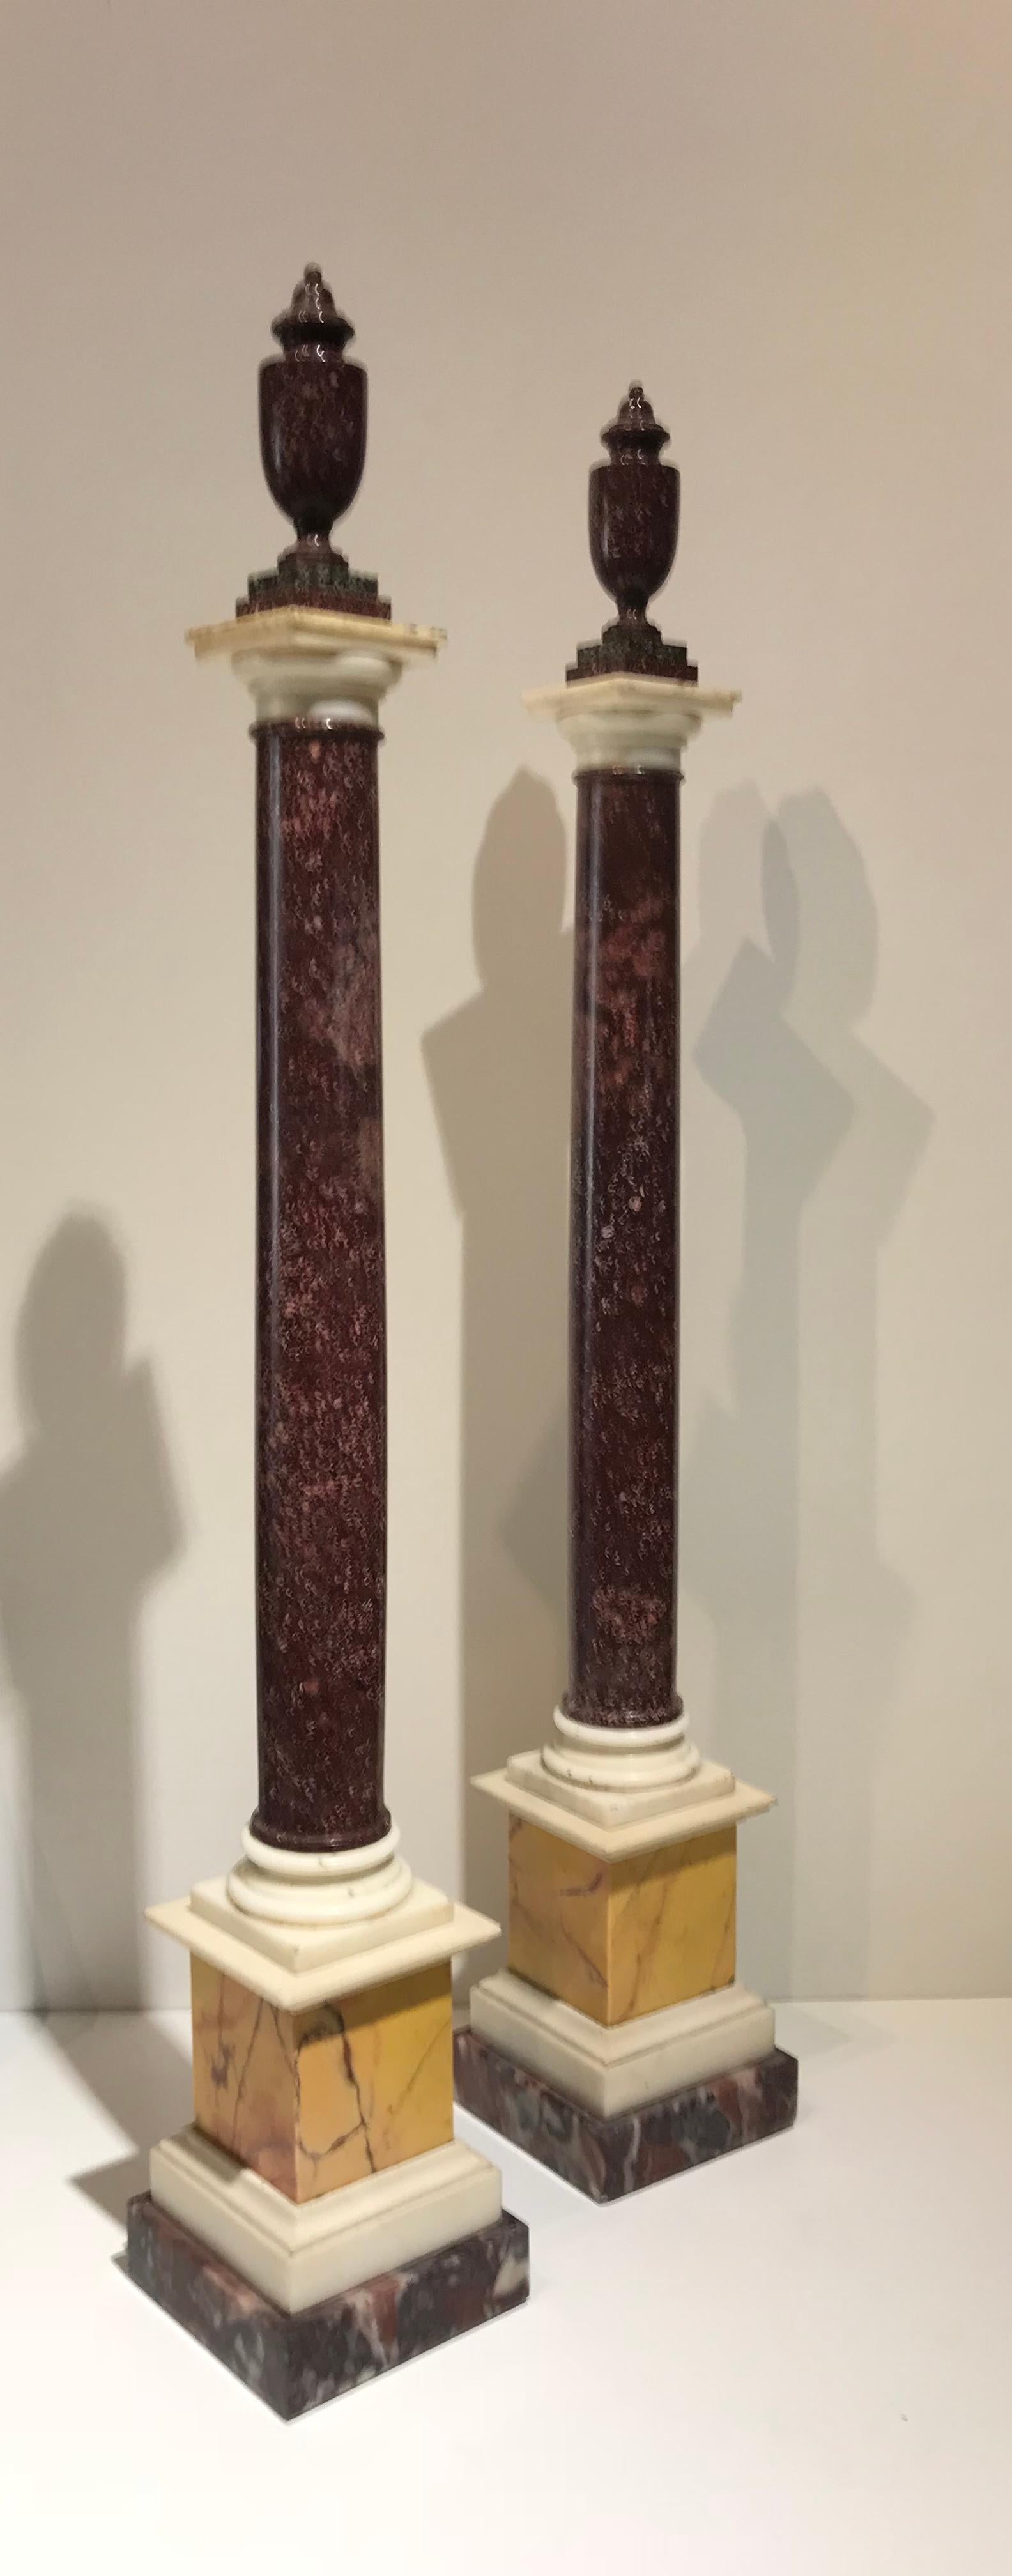 A very beautiful and impressive pair of grand tour column with a pair of neoclassical porphyry vase on the Tuscany style capital. The opera, is made with a selection of specimen and very rare marble, Africano marble, statuary marble and yellow